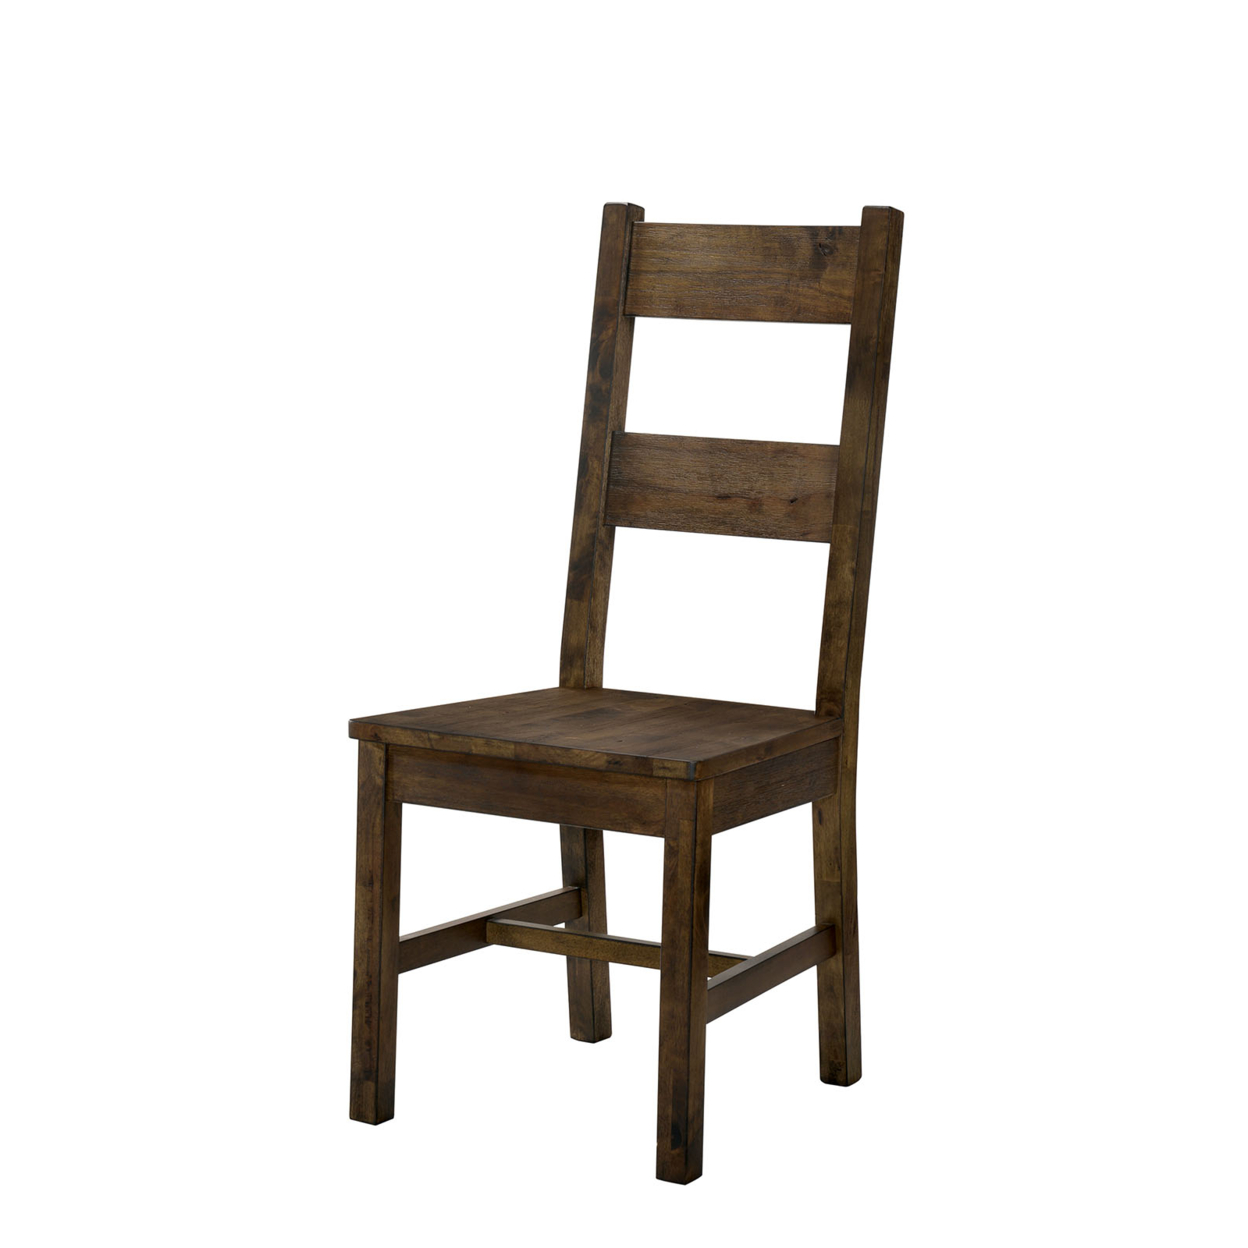 Transitional Style Solid Wood Side Chair With Block Legs, Pack Of Two, Brown- Saltoro Sherpi